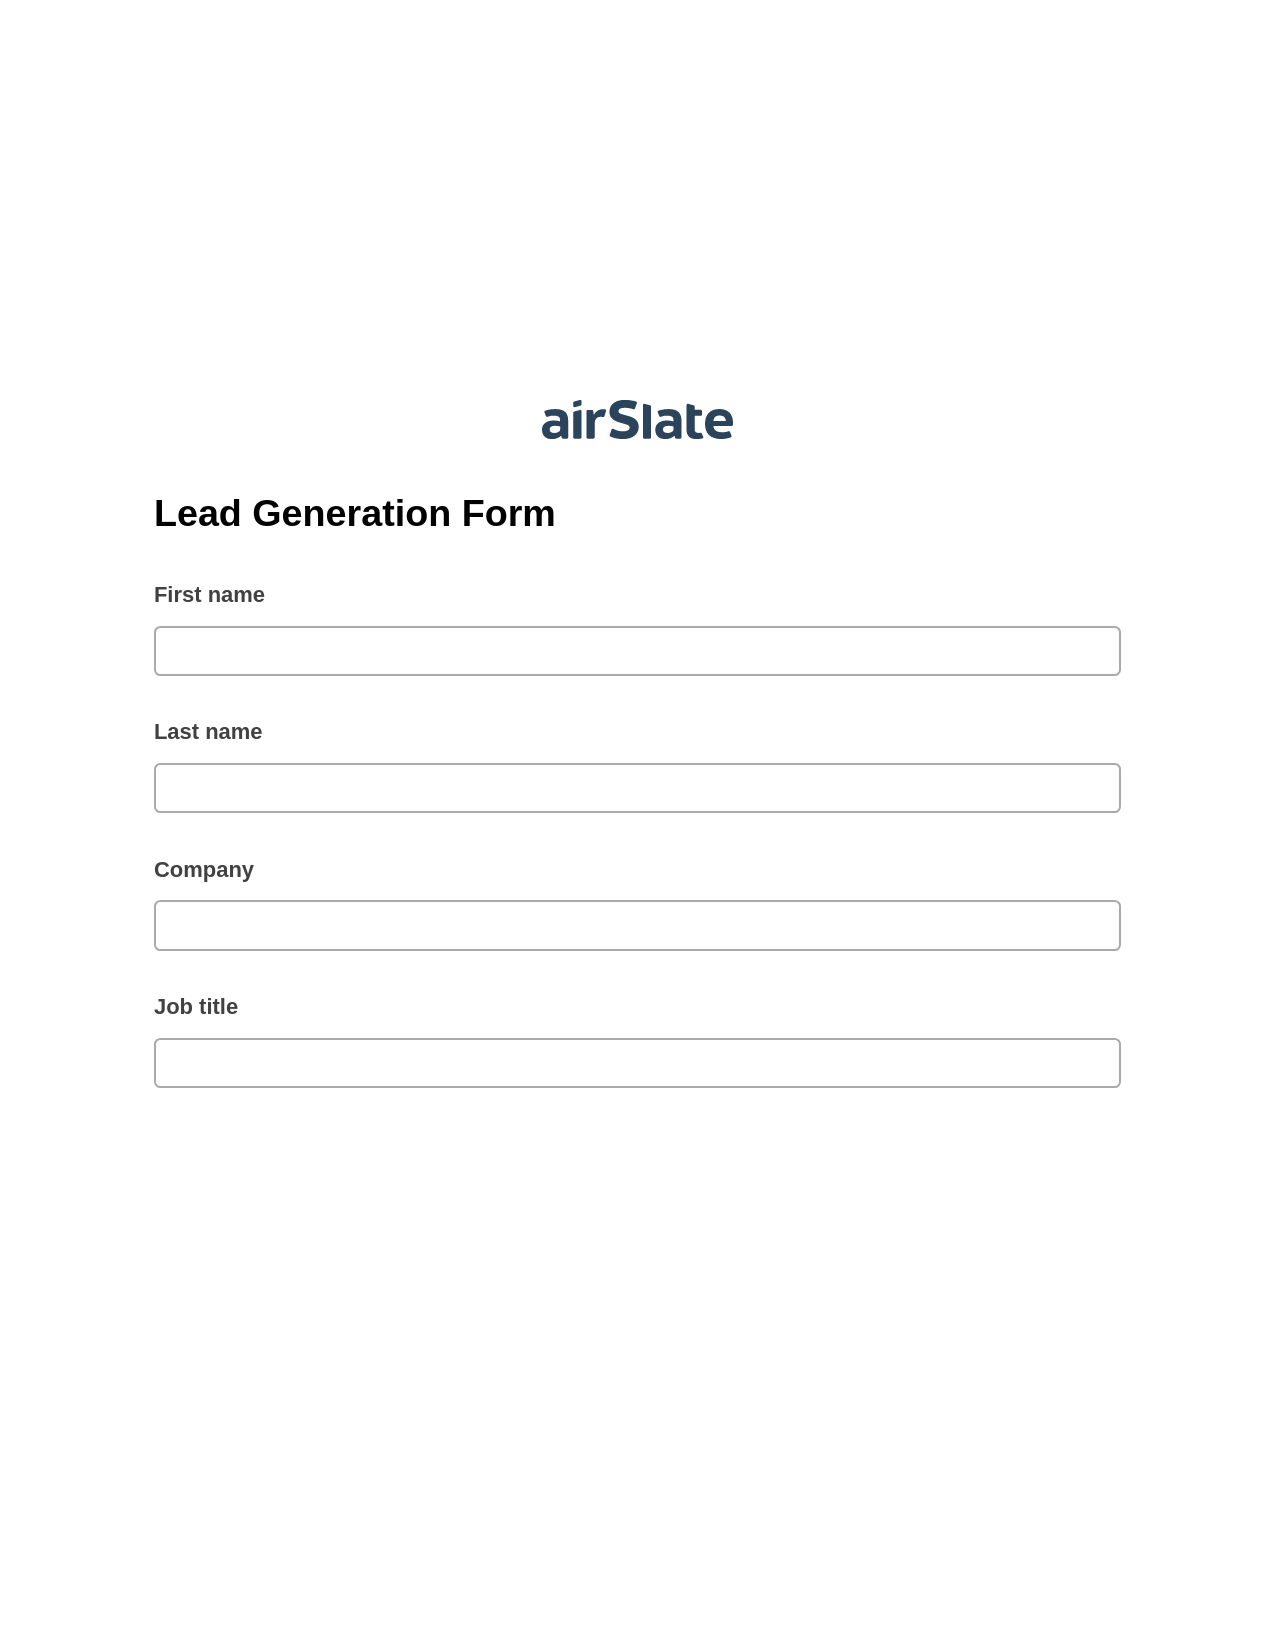 Lead Generation Form Pre-fill from Salesforce Records with SOQL Bot, Send a Slate with Roles Bot, Archive to Dropbox Bot